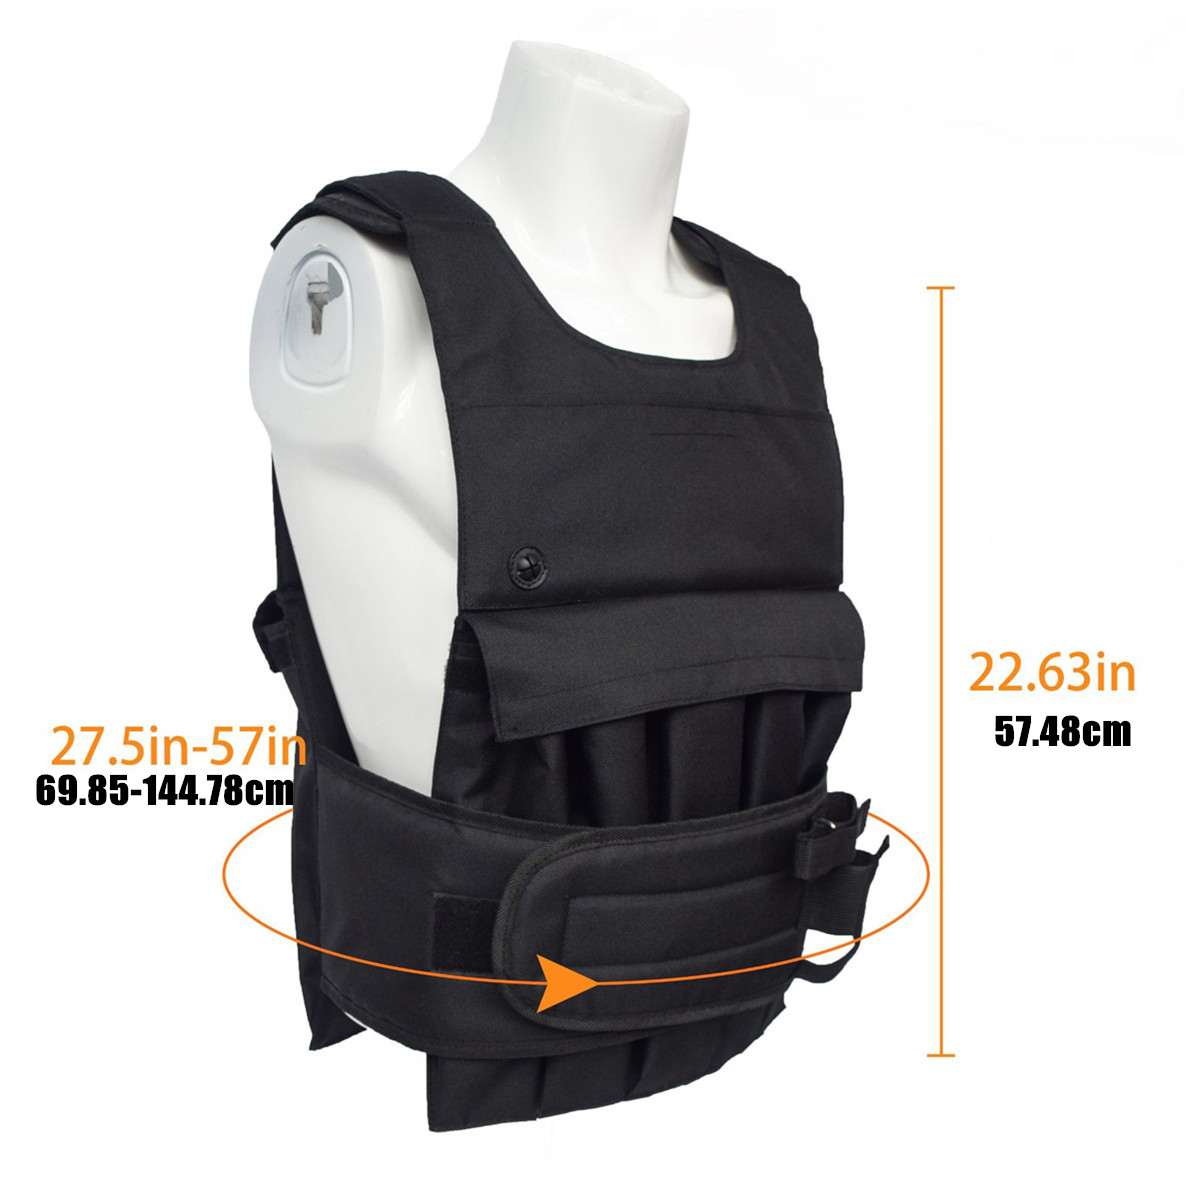 Adjustable-Weight-Vest-Outdoor-Training-Physical-Exercise-Slimming-Running-trainingWeight-Bearing-Wa-1695499-3